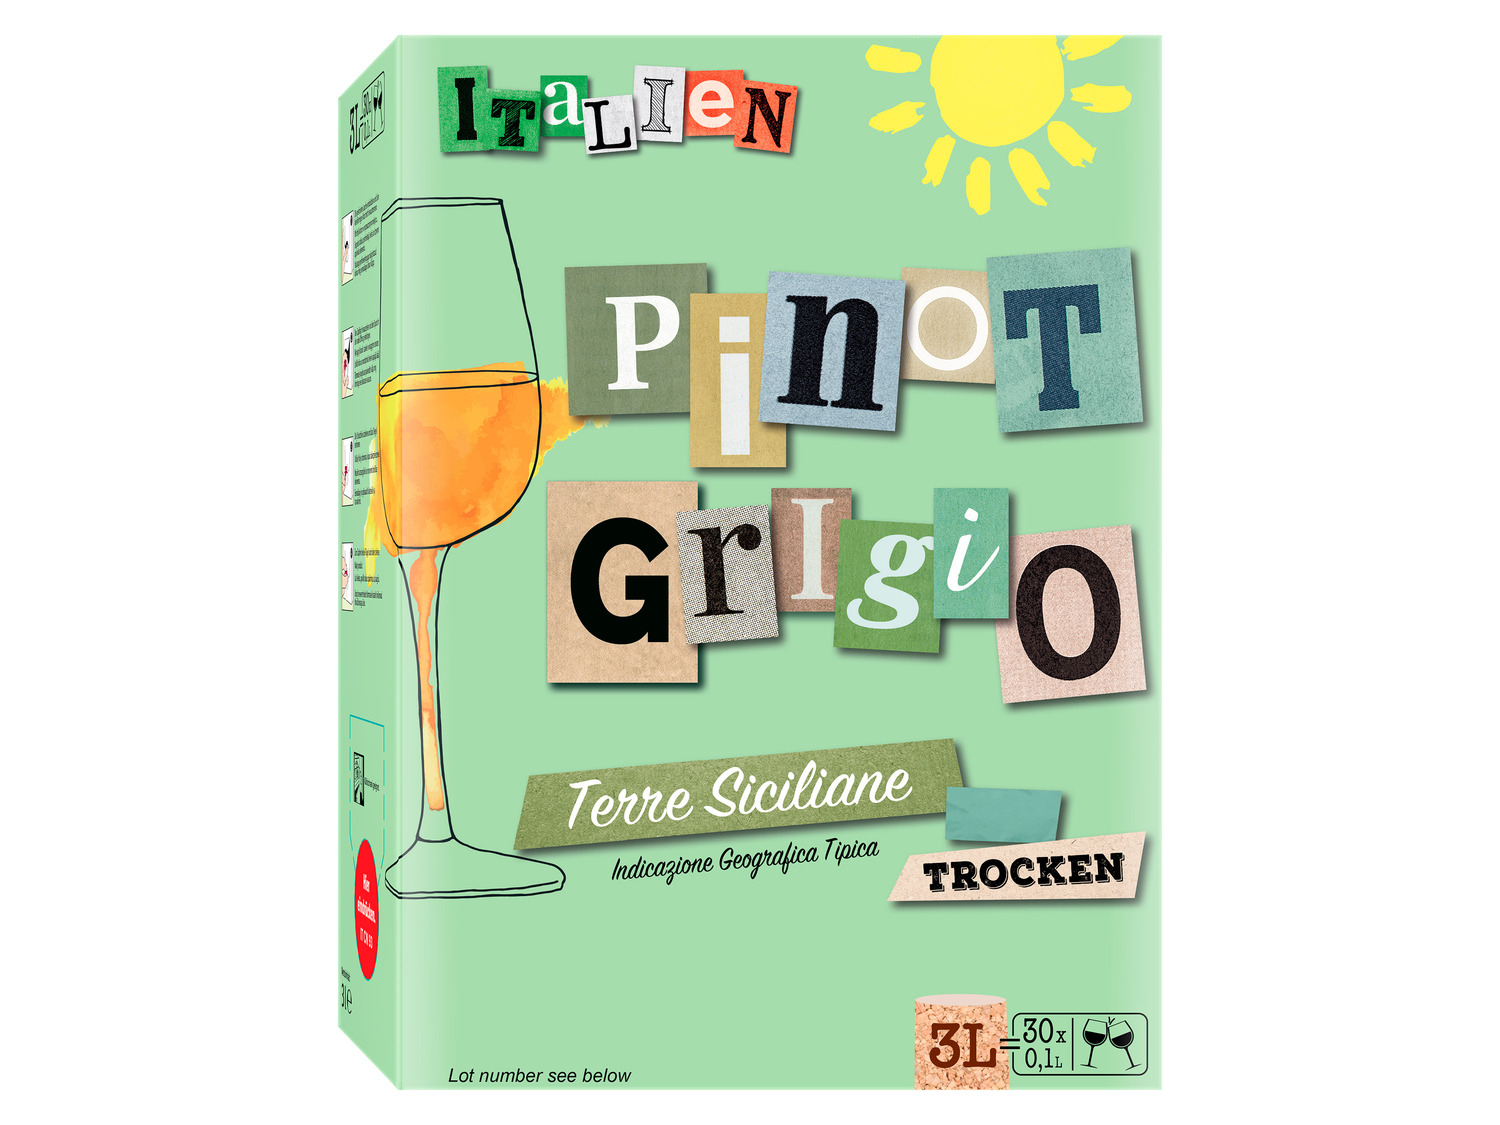 ᐉ Products box terre igt weißwein l 3 in Price grigio / like: 2023 trocken - bag Compare pinot siciliane 0 Lidl